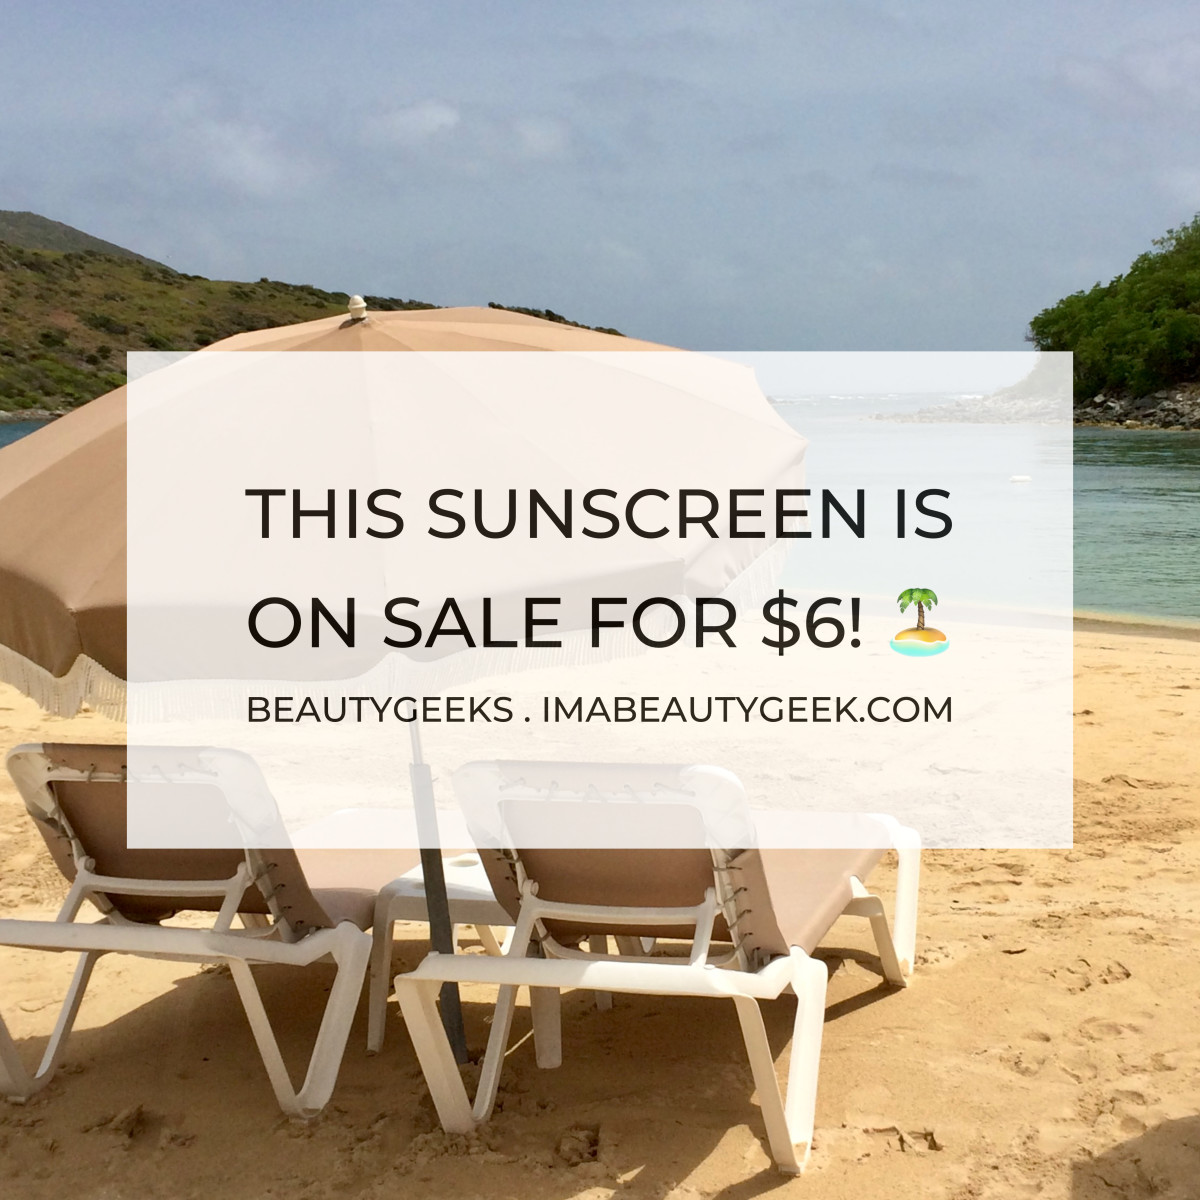 This sunscreen is on sale for $6